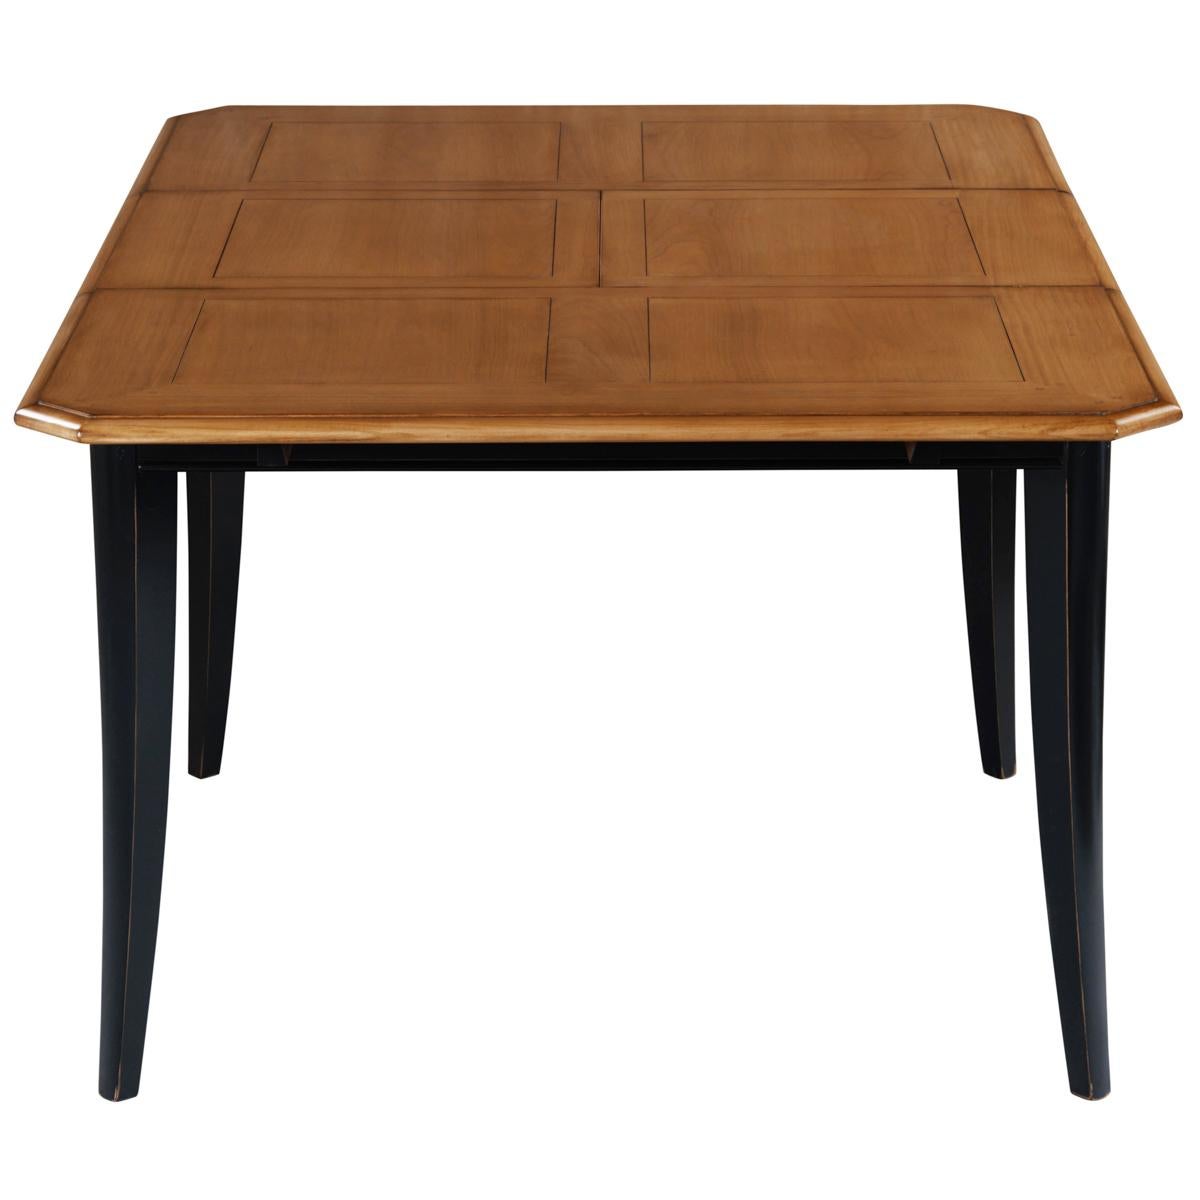 French Tradition Extensible Square Dining Table, Smoked Cherry & Black Laquered For Sale 1